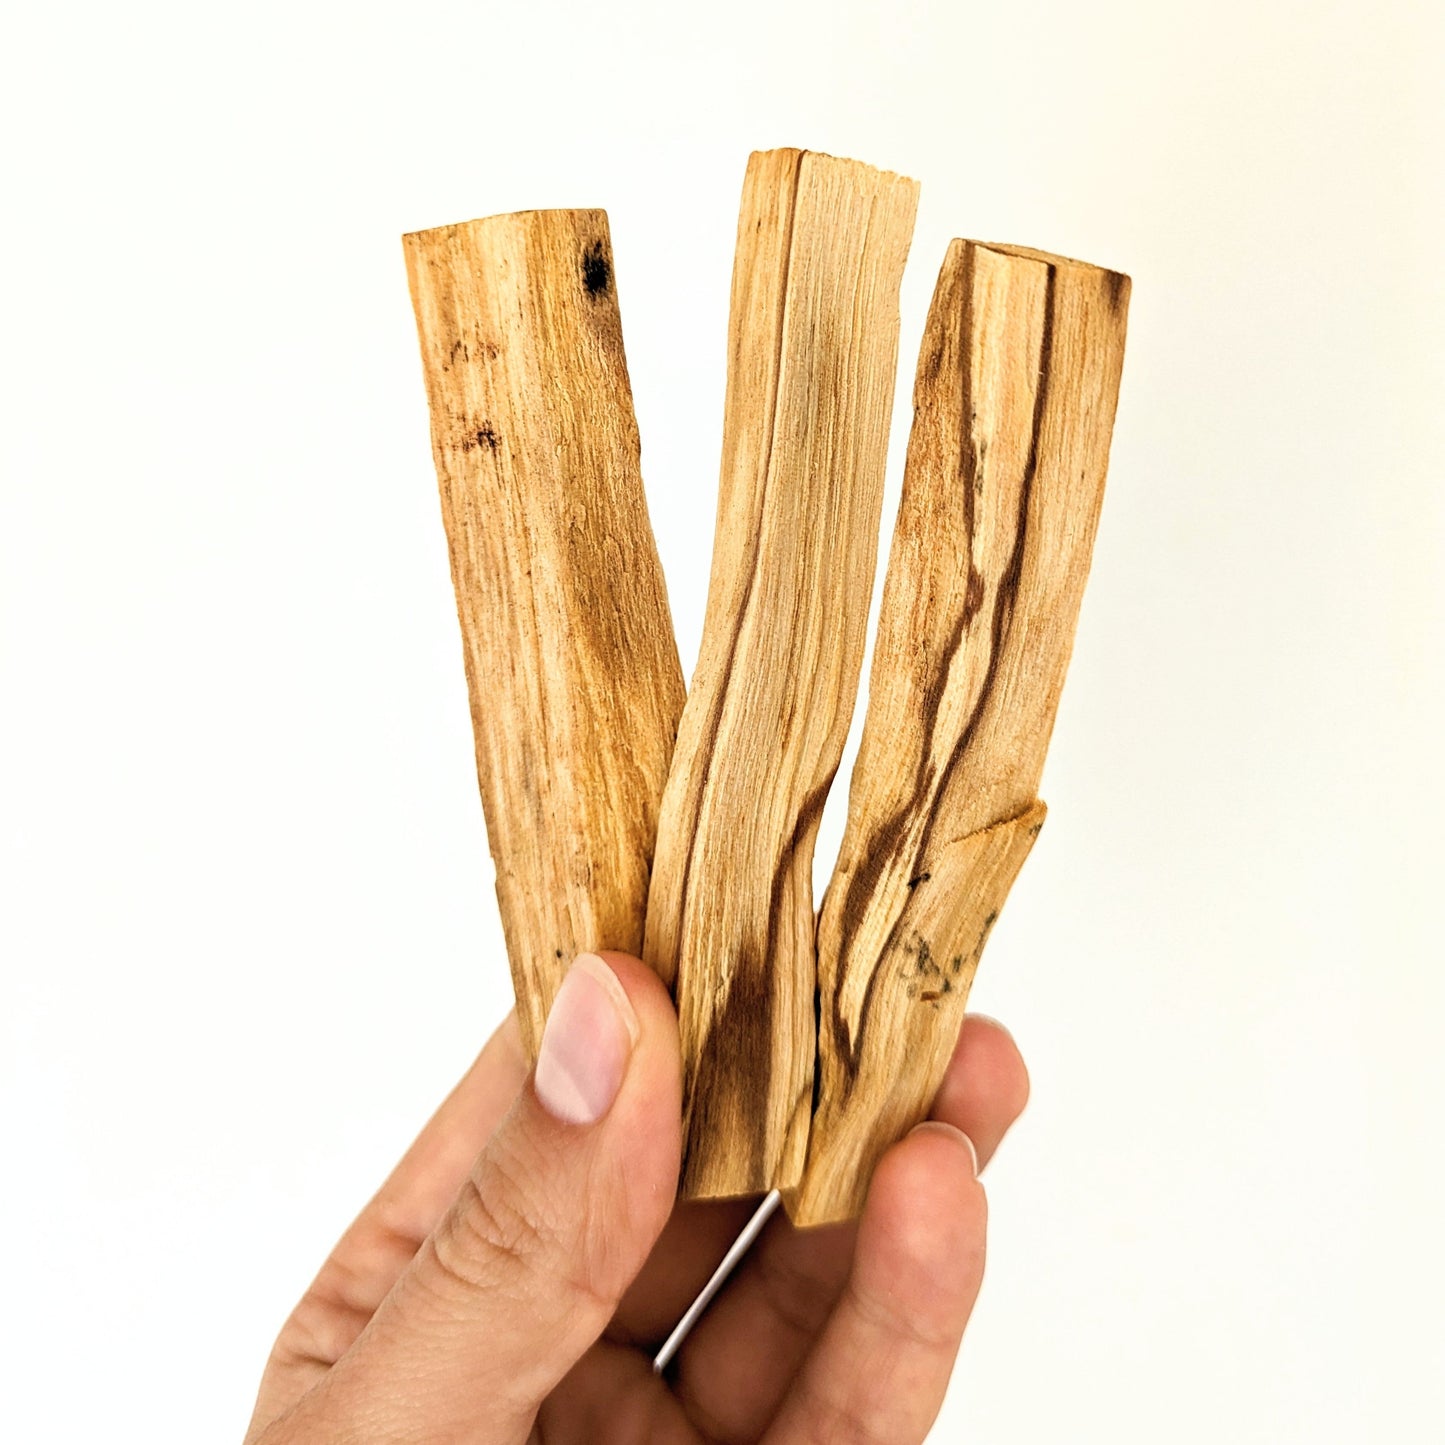 Palo Santo Wood Sticks SERFOR Certified Sustainably Harvested - High Resin Holy Wood